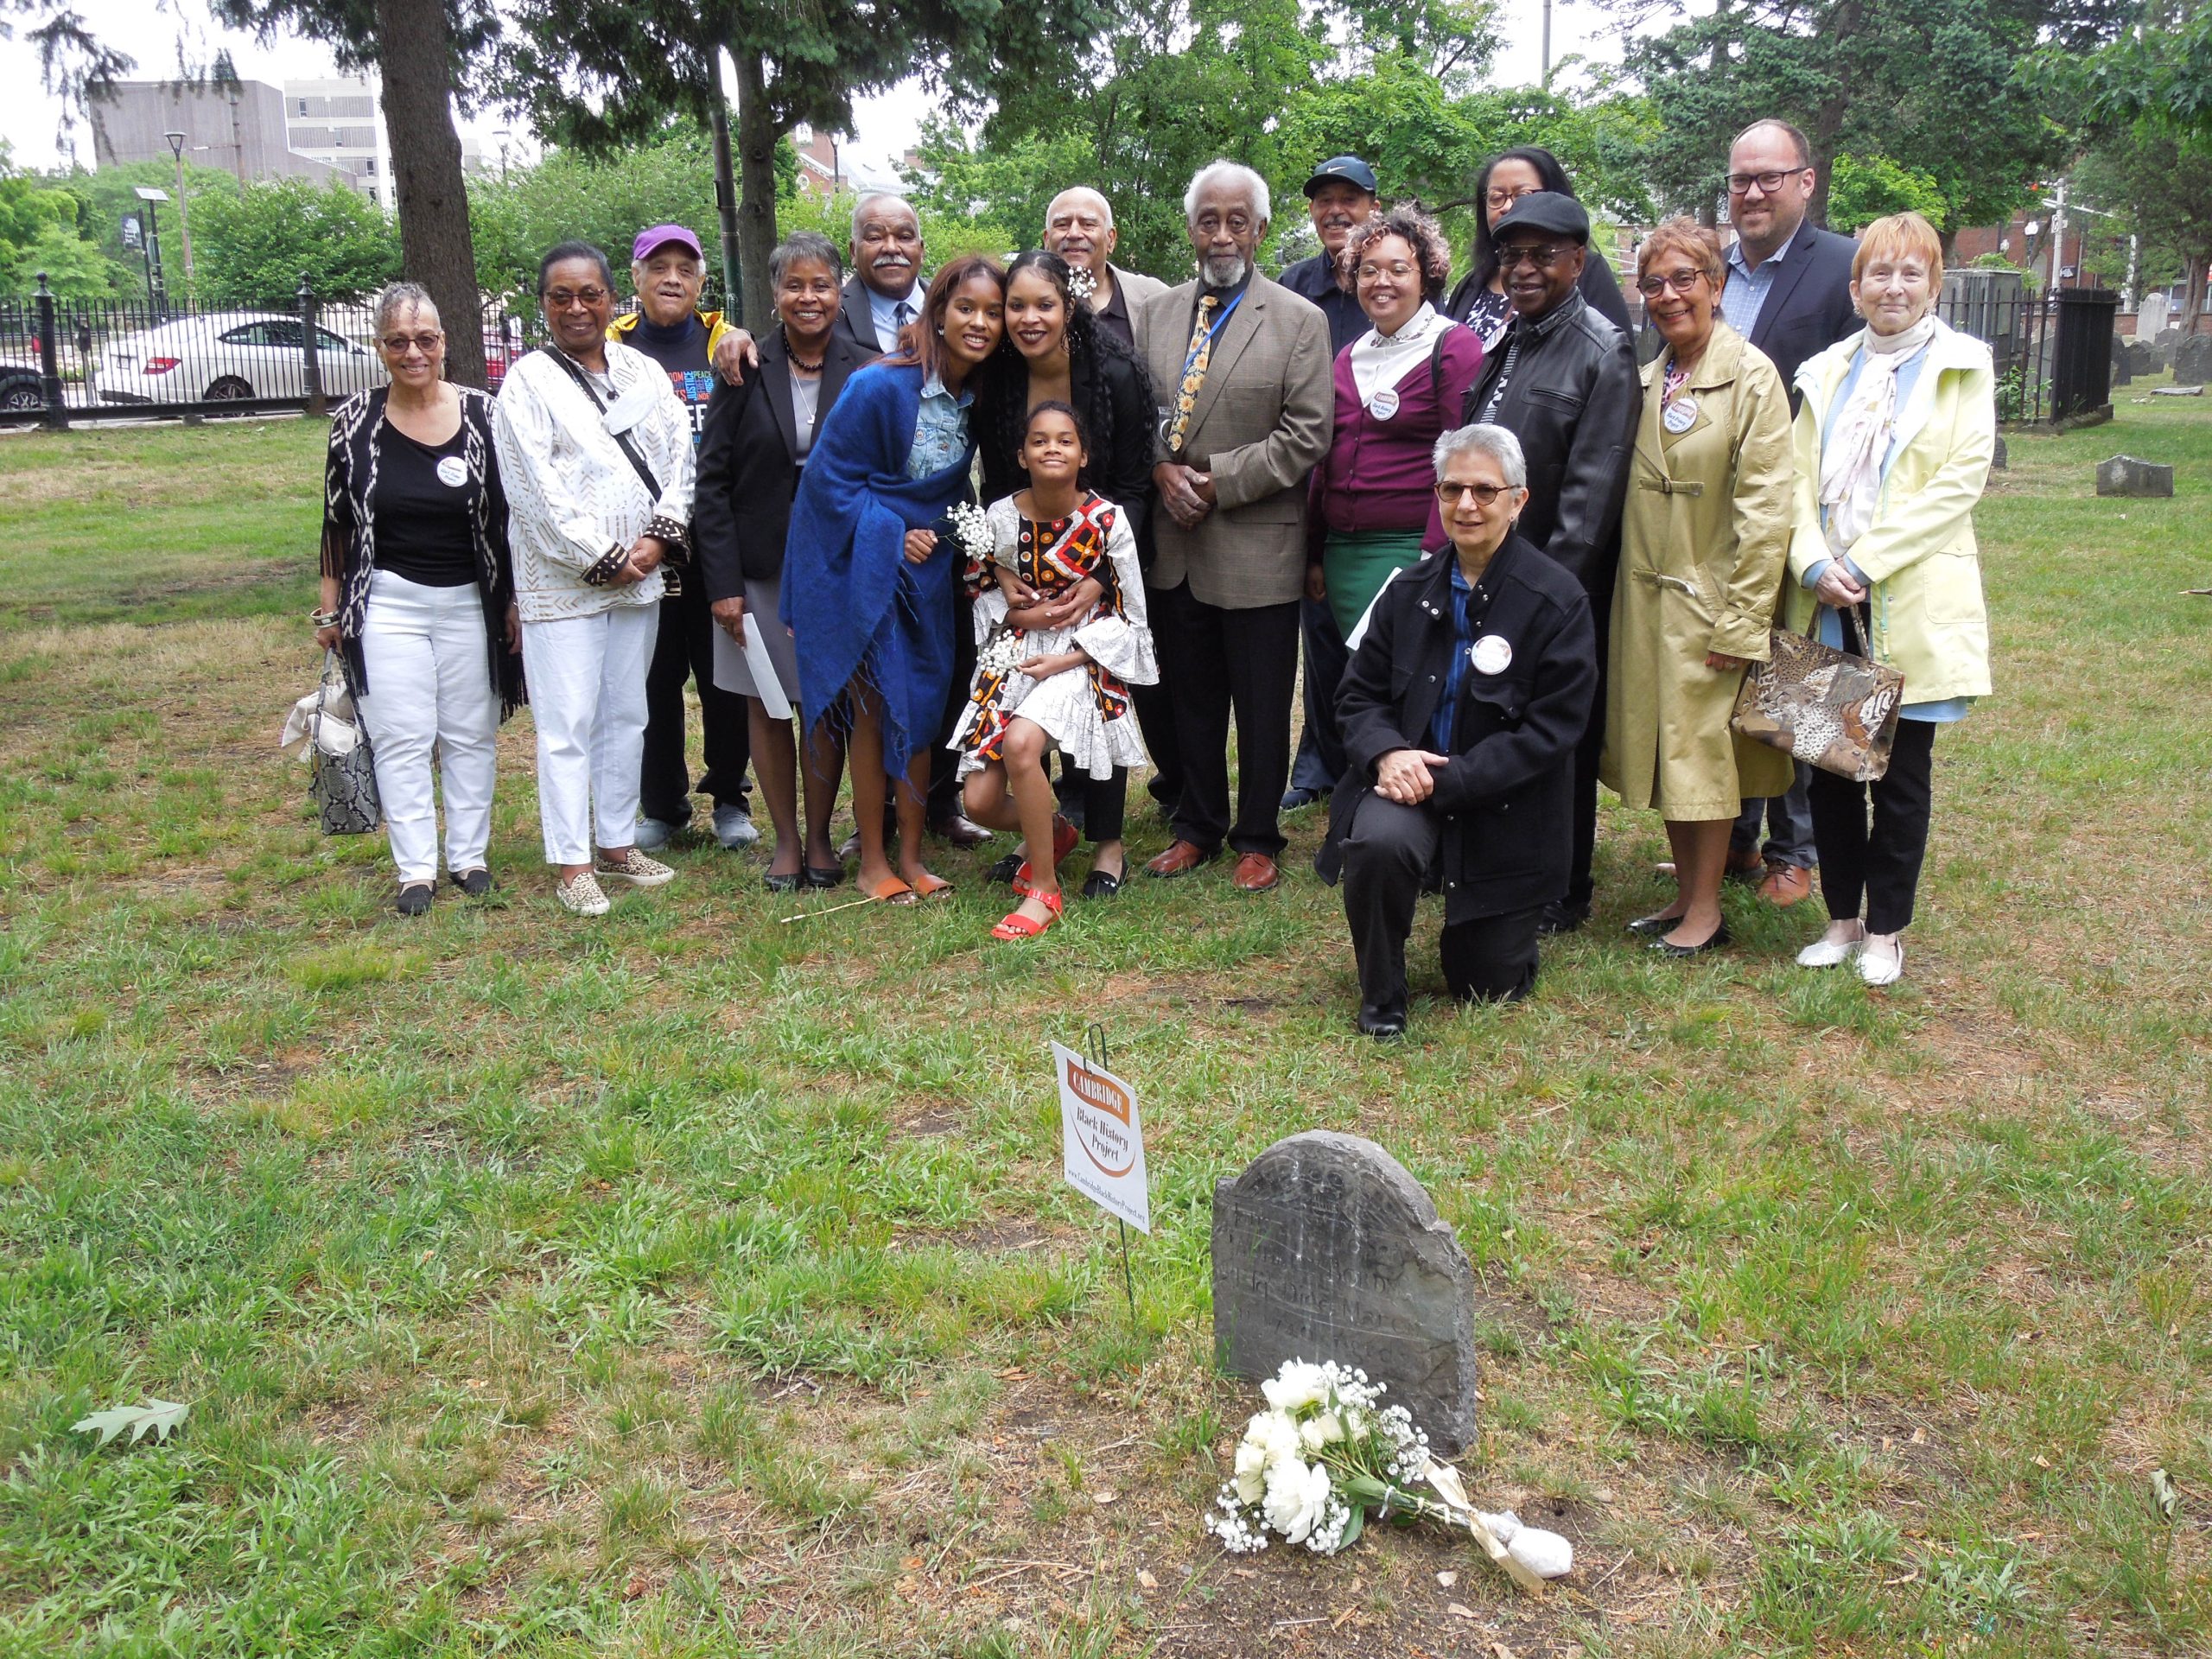 Cambridge Black History Project Committee joined by Rev. Dan Smith, Sumner McClain, and the Lloyd Family and